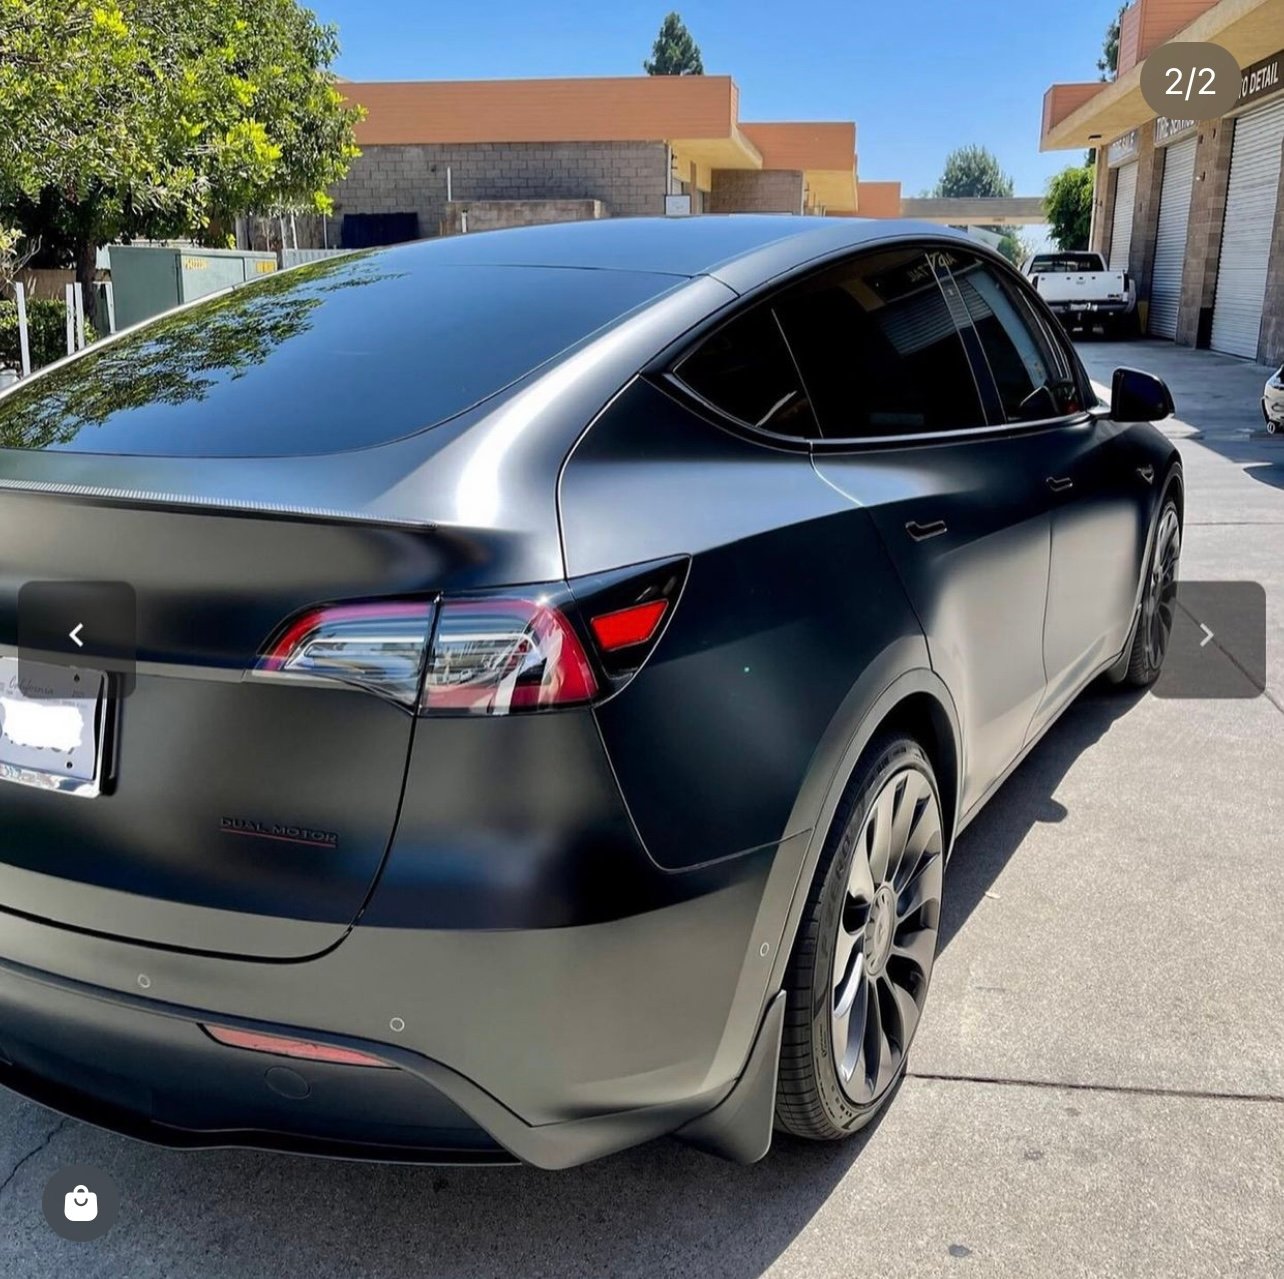 Tesla's offical front mud flaps are worth it!